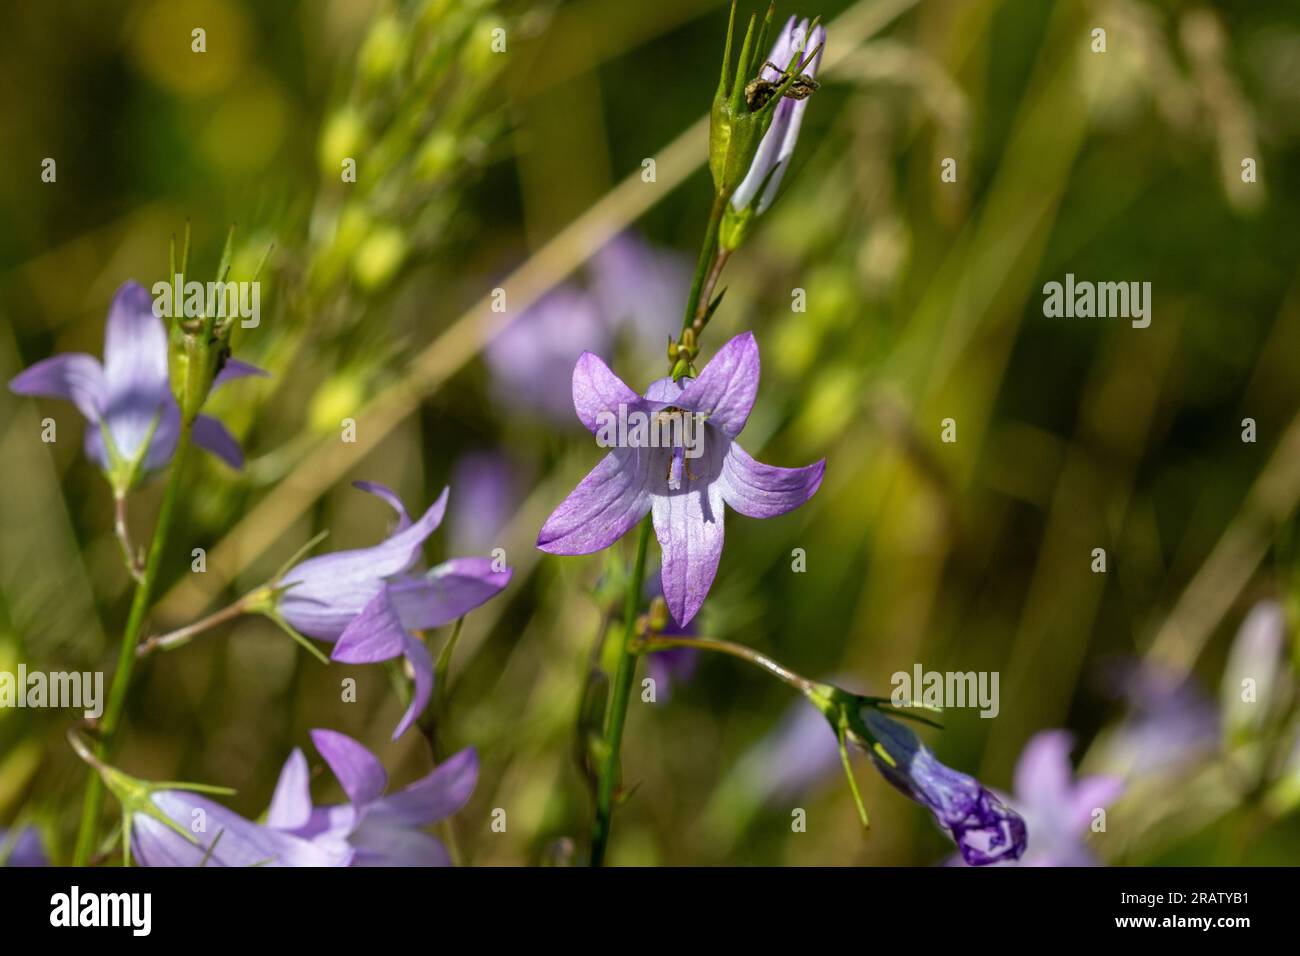 Creeping Bellflowers (Campanula rapunculoides) growing in the wild. Stock Photo